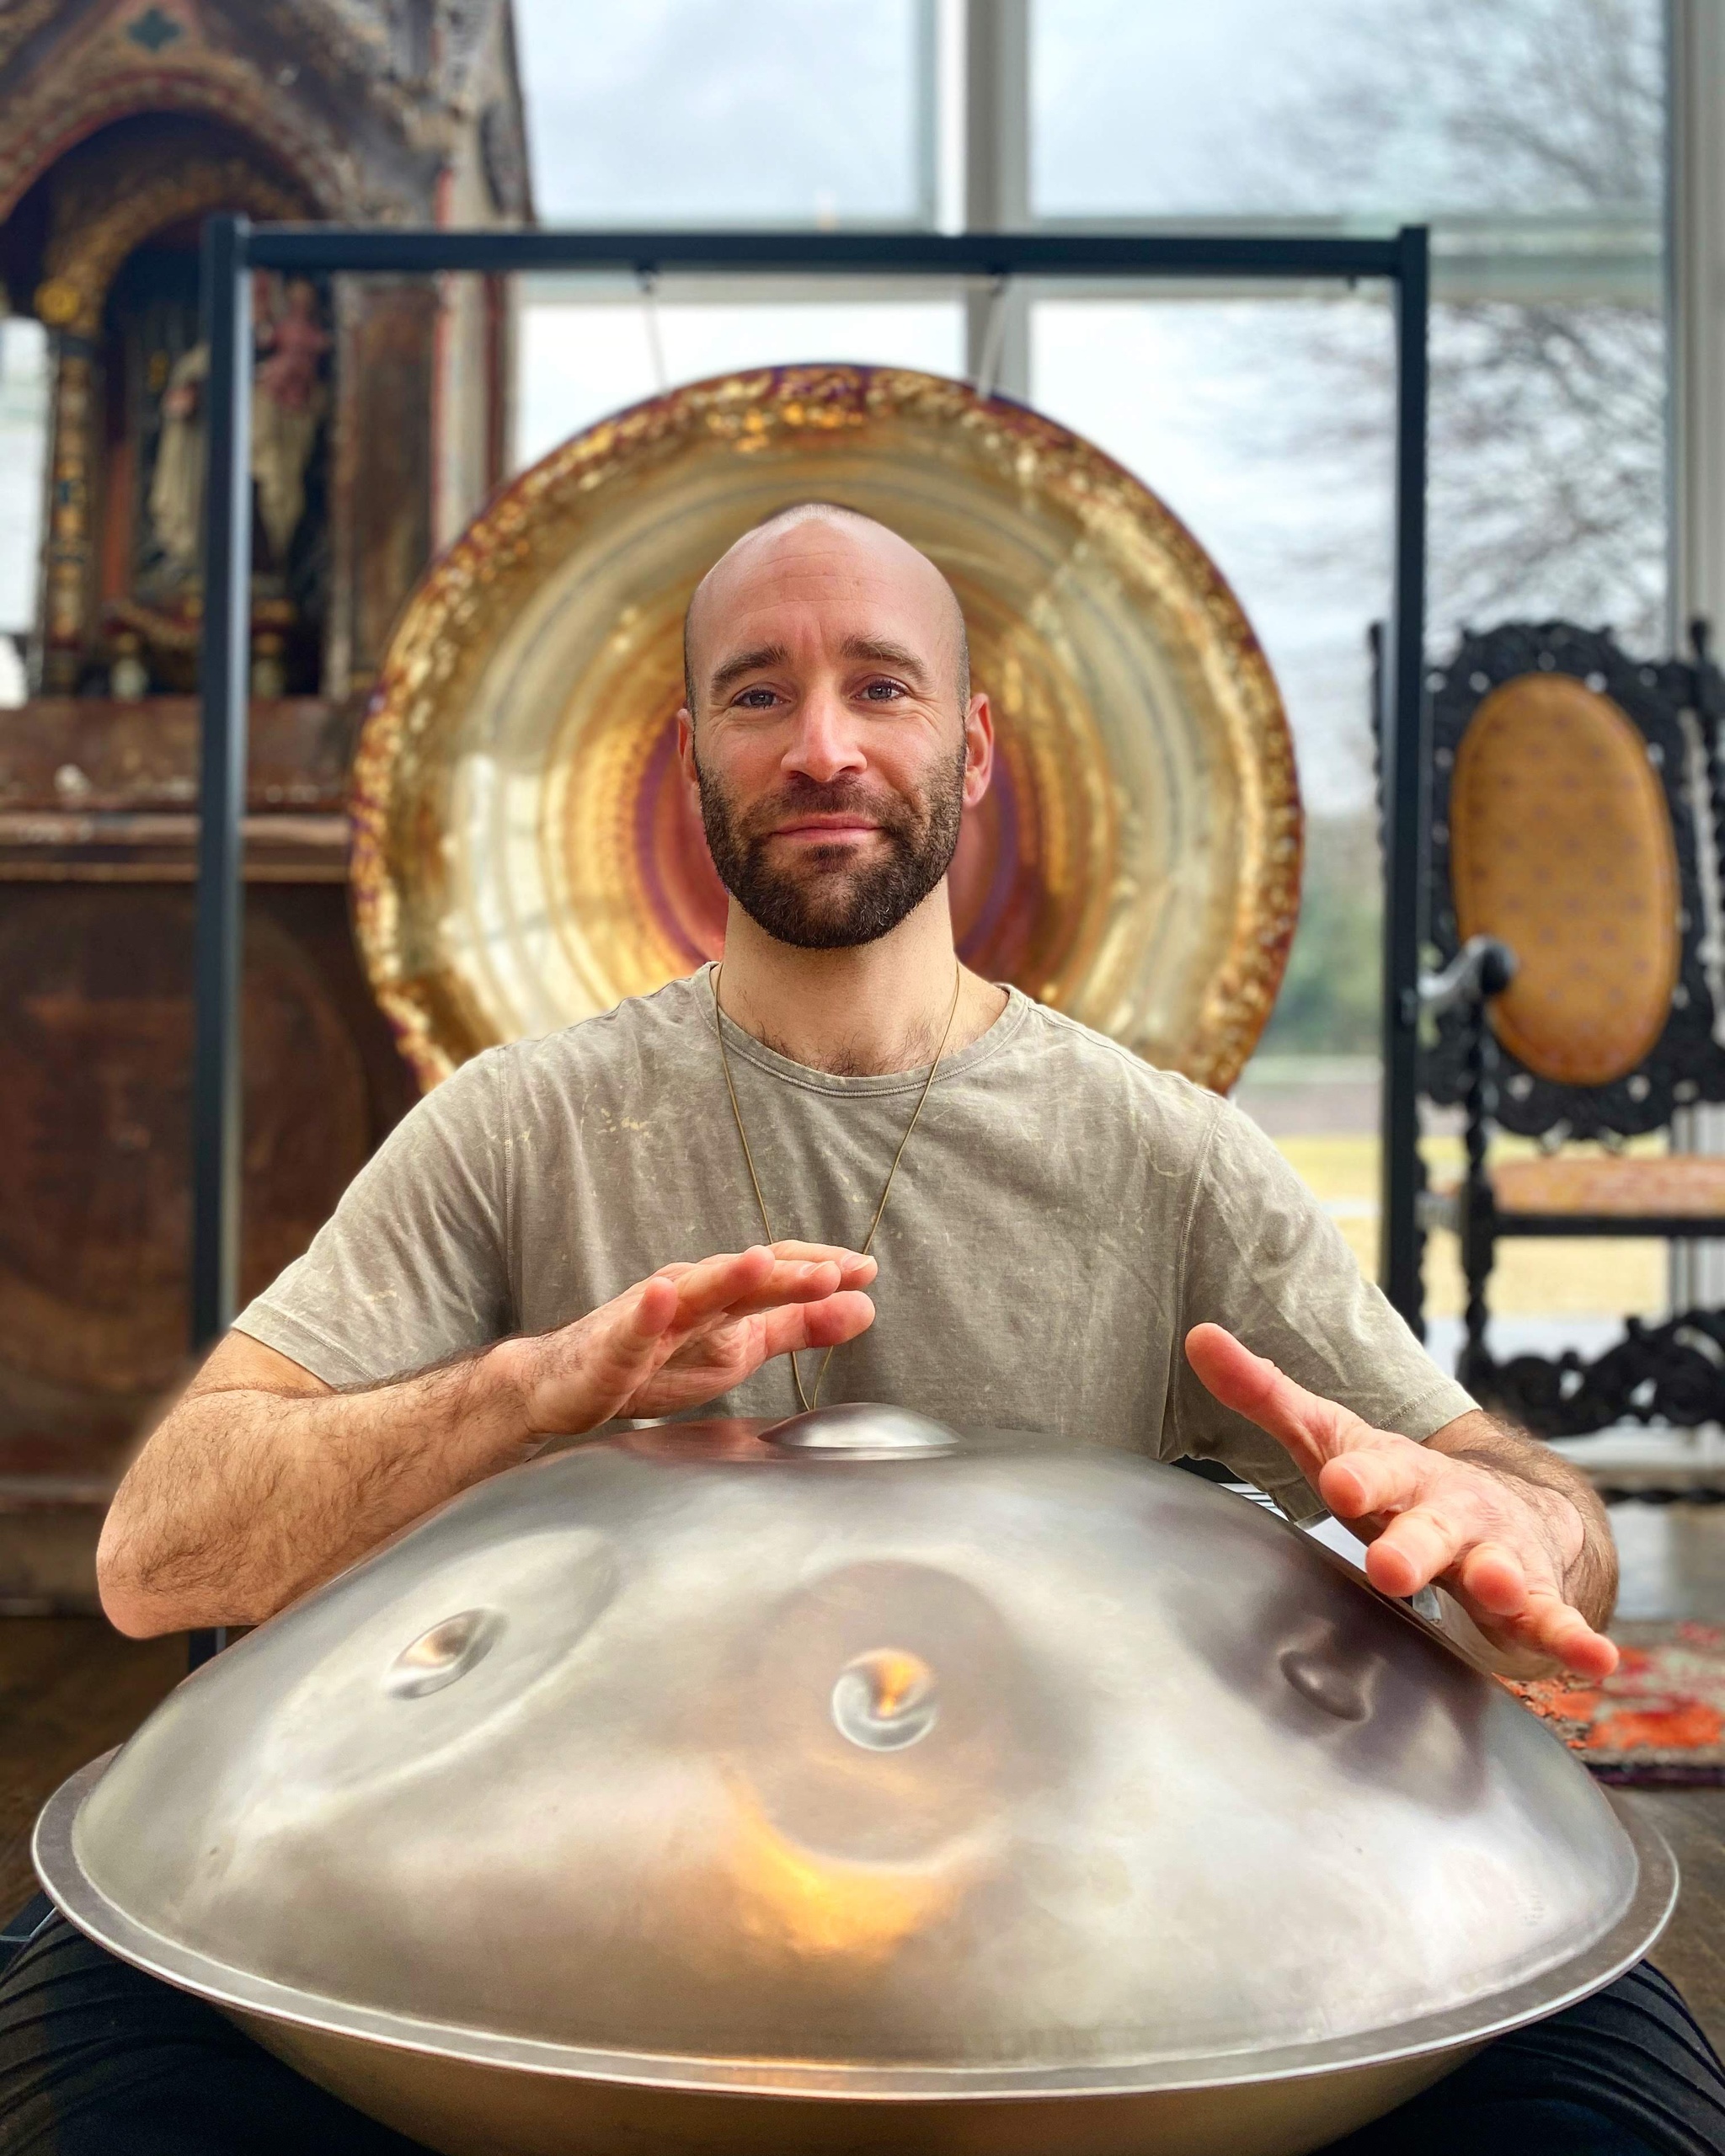 A white man smiles from behind a large metal percussion instrument that looks like a wok turned upside down. His hands are suspended over it as he drums on it. He wears a gray tshirt, smiles at us, and has a beard with a clean shaven head. Behind his head hangs a gong that surrounds his head like a halo. 